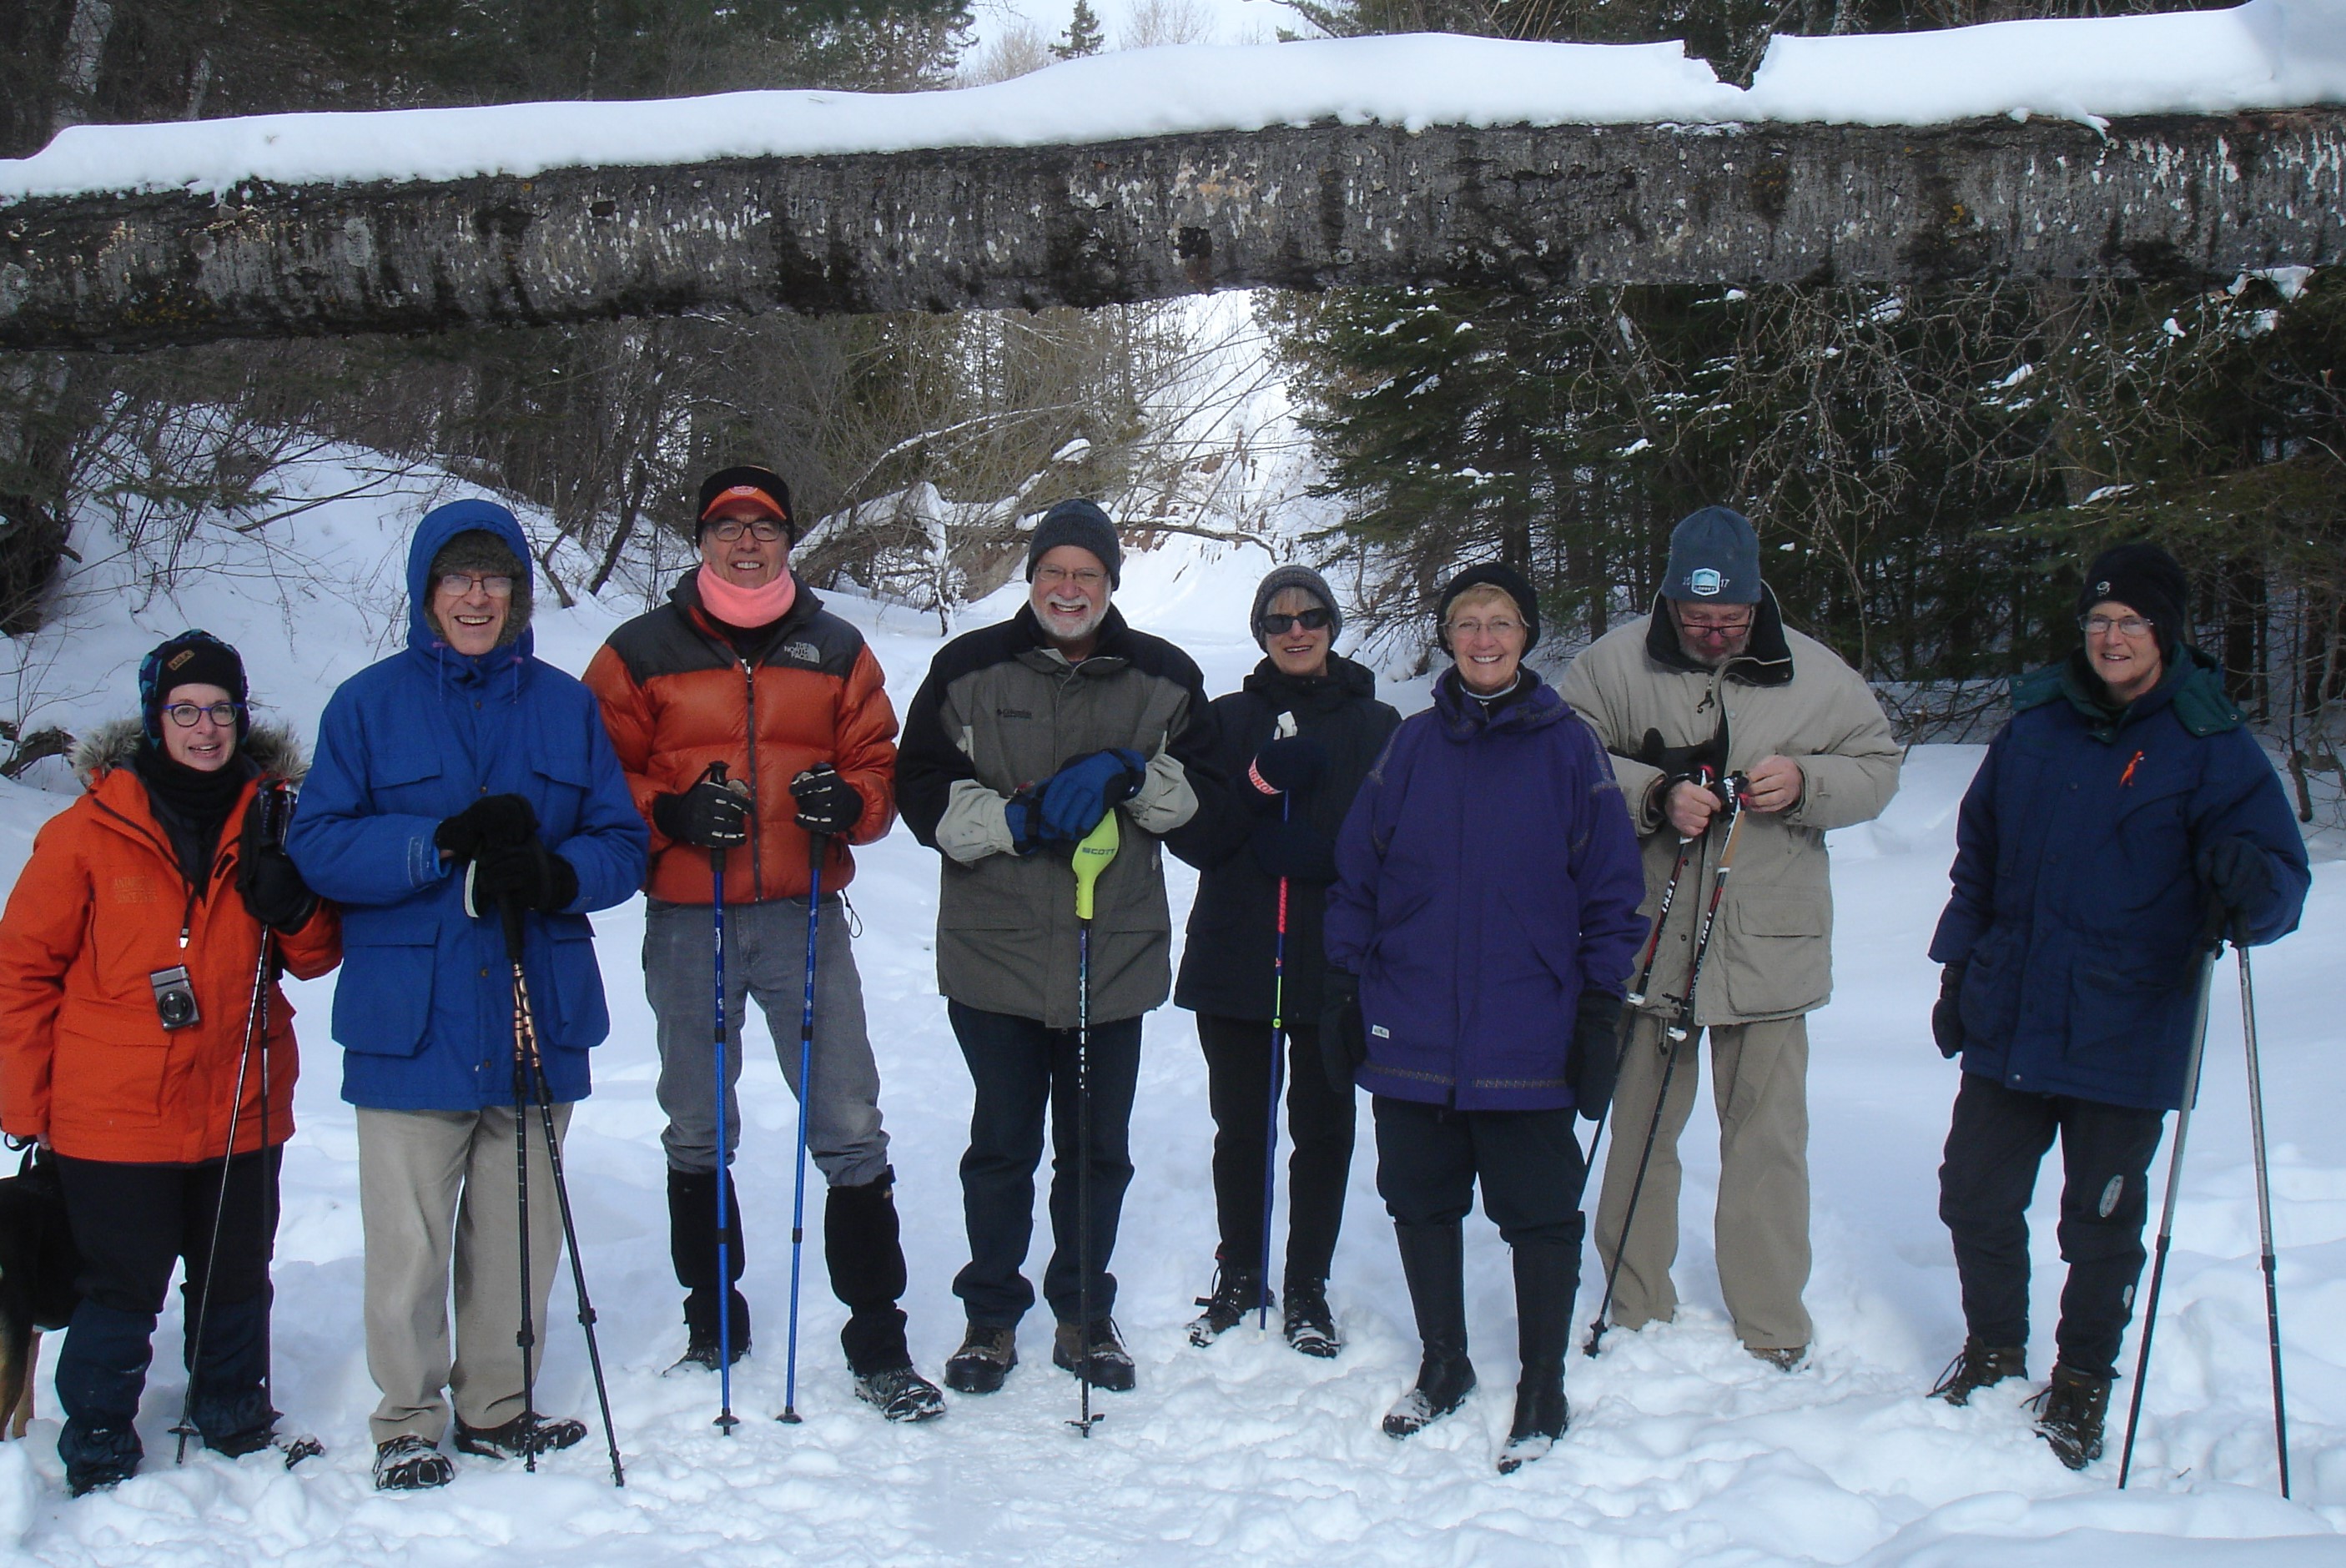 Members showshoeing in the winter woods